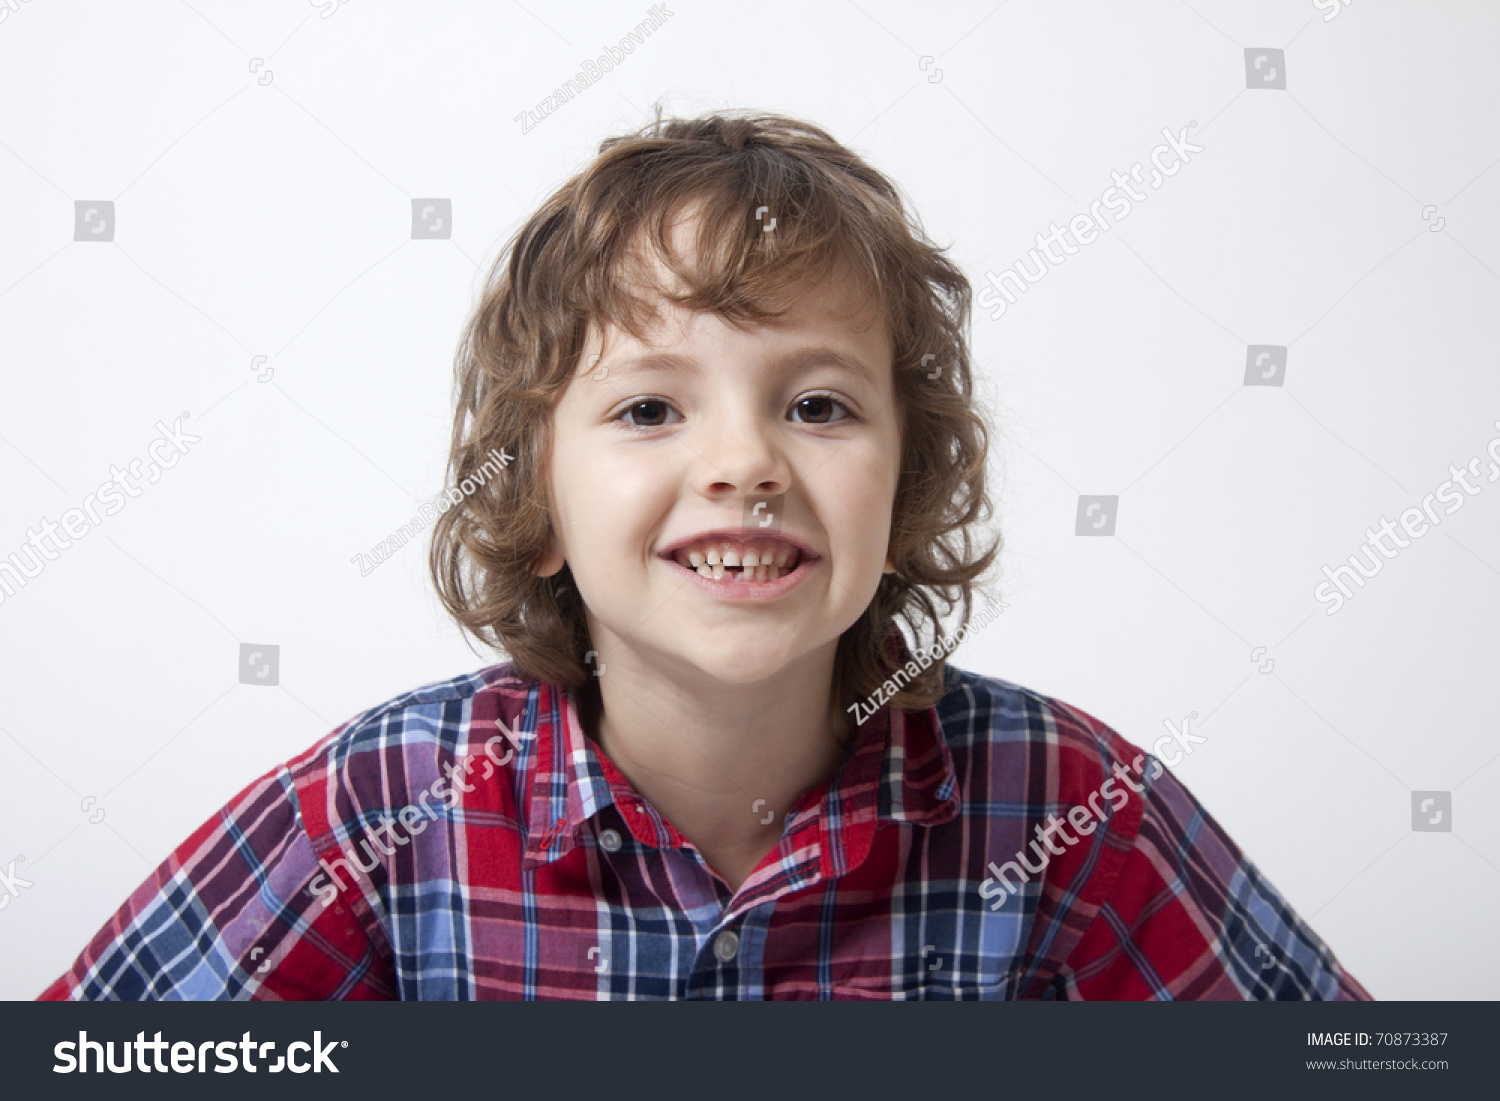 Boy with missing tooth #70873387